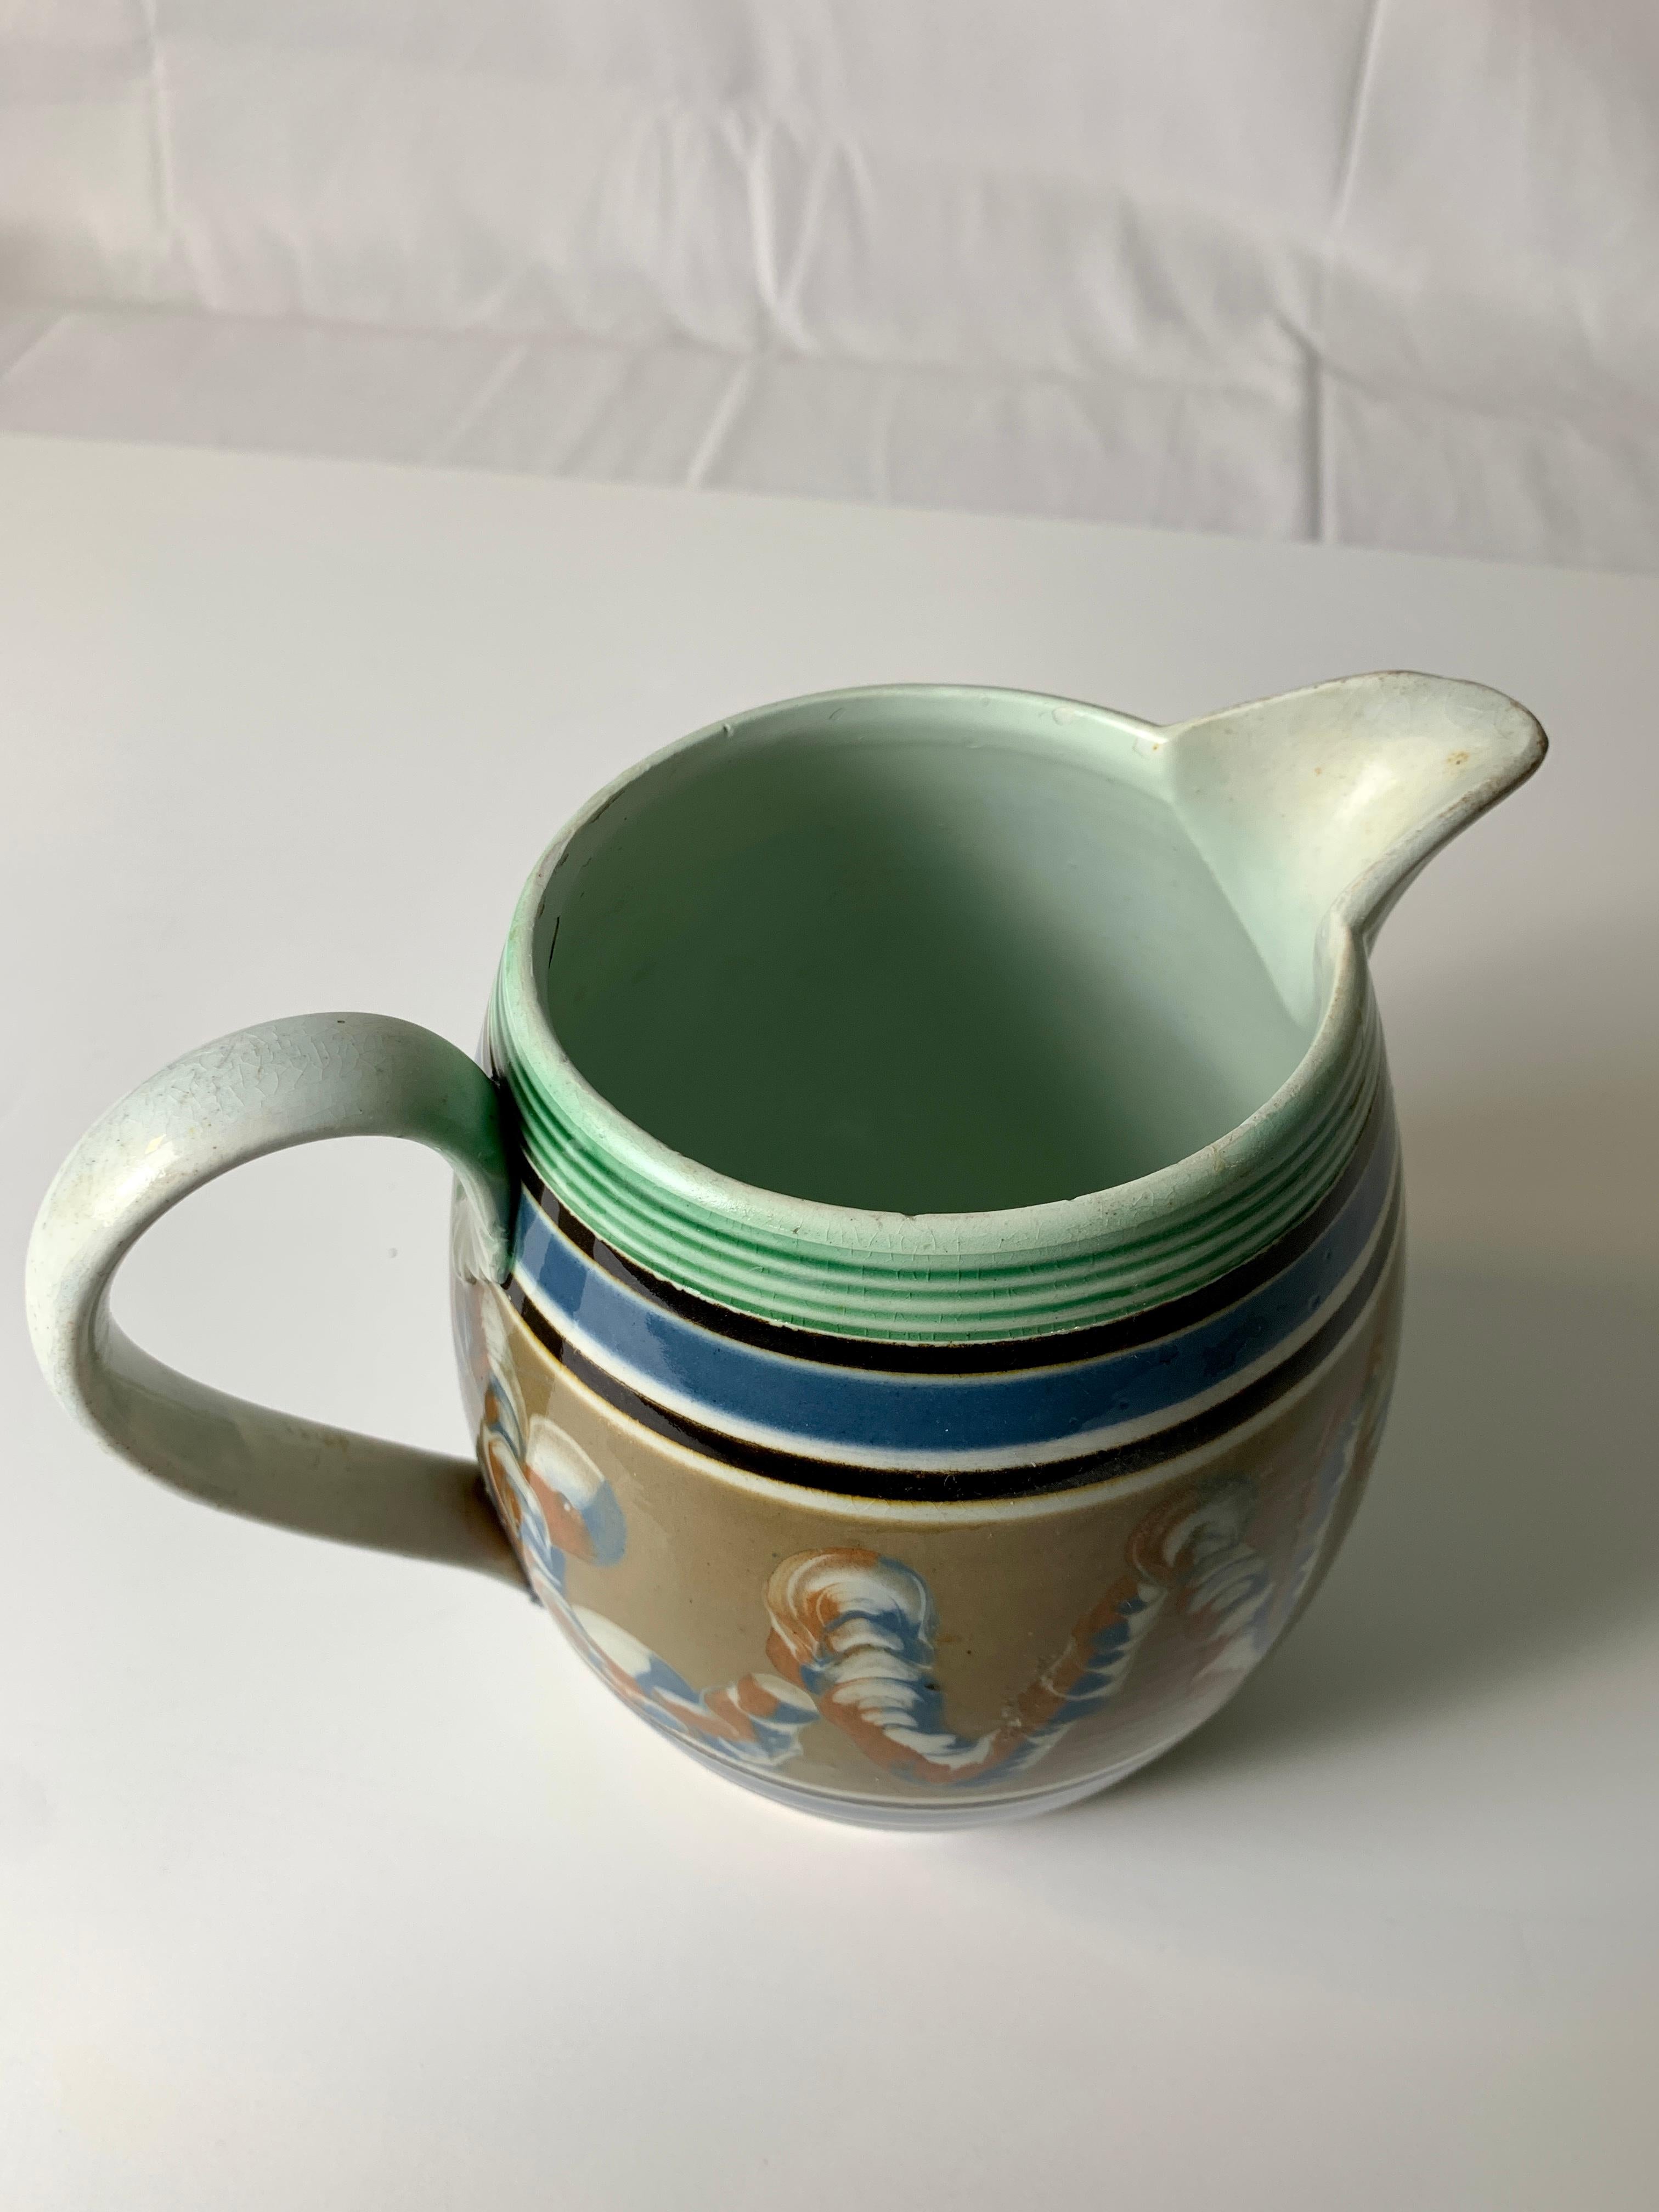 Earthenware Mochaware Pitcher Decorated with Soft Blue Green & Brown Made England, c- 1820